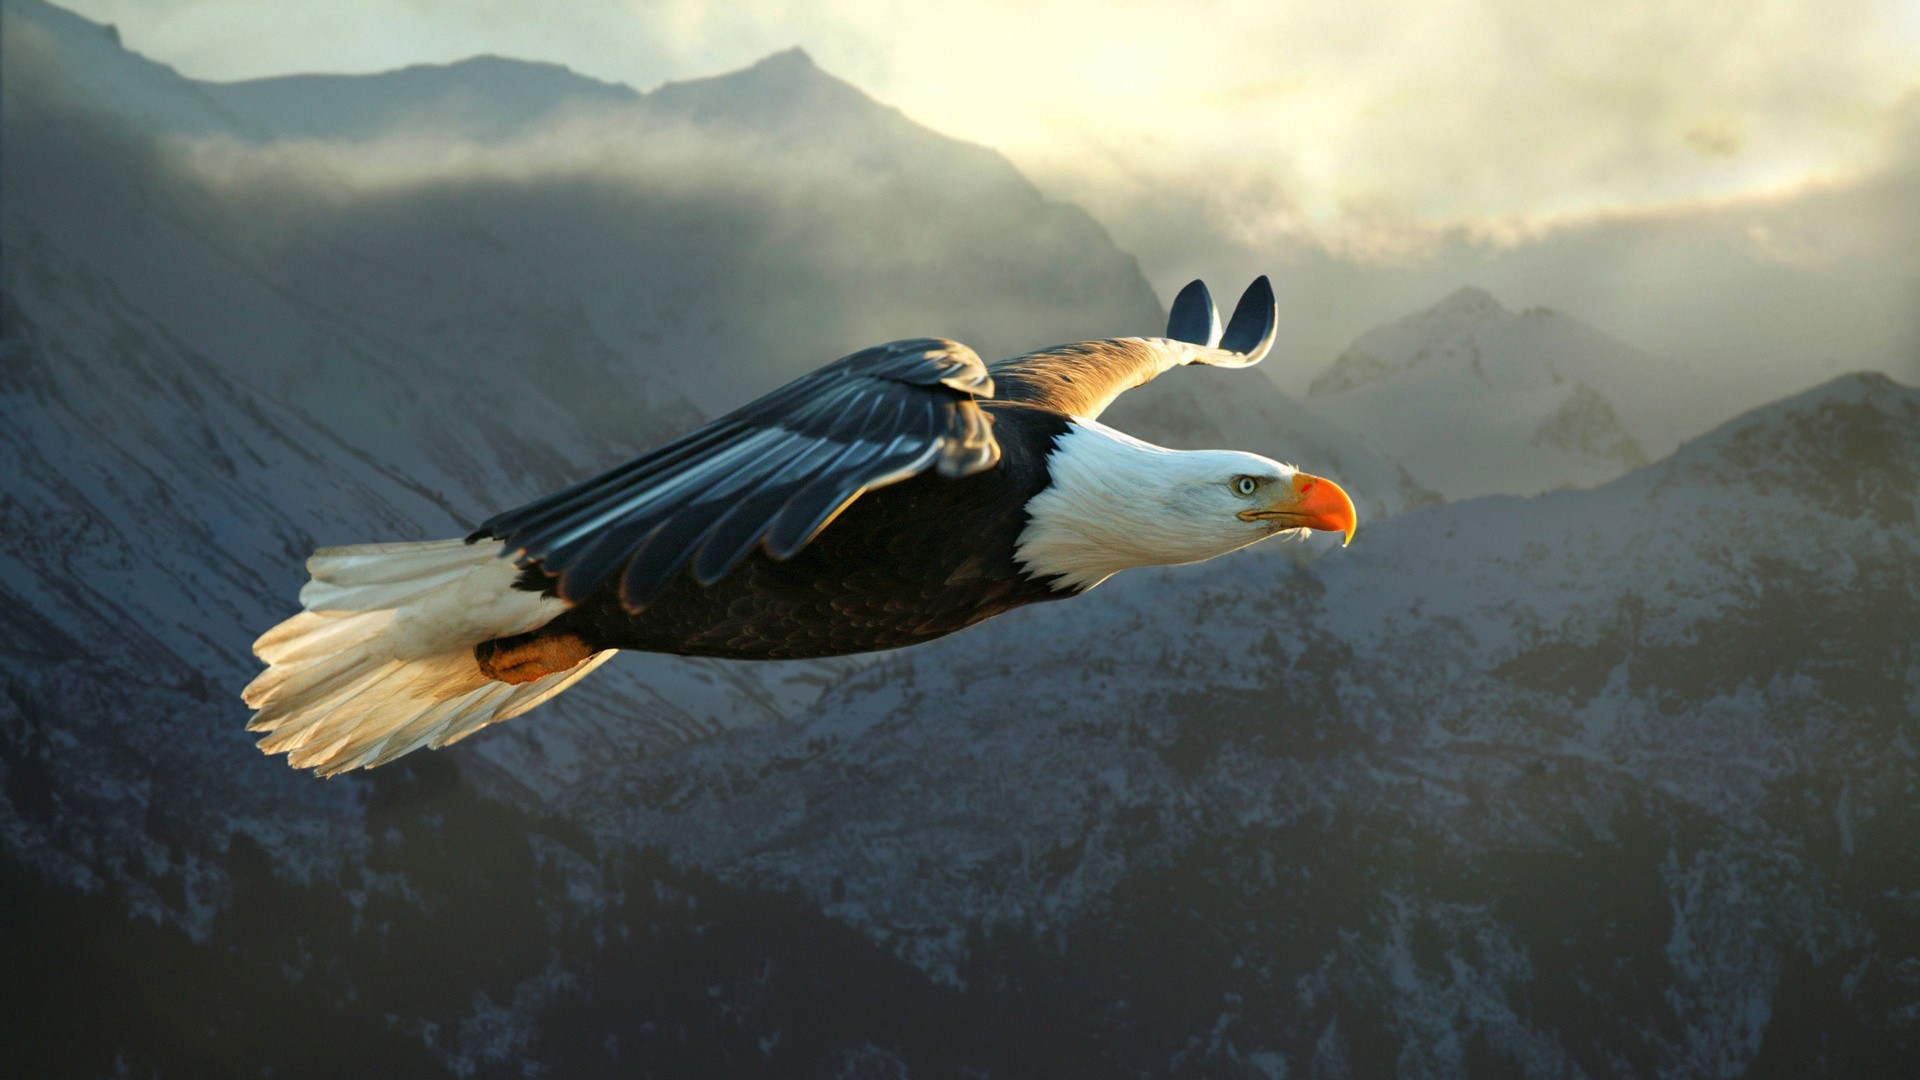 General 1920x1080 animals nature eagle bald eagle birds wings mountains landscape flying